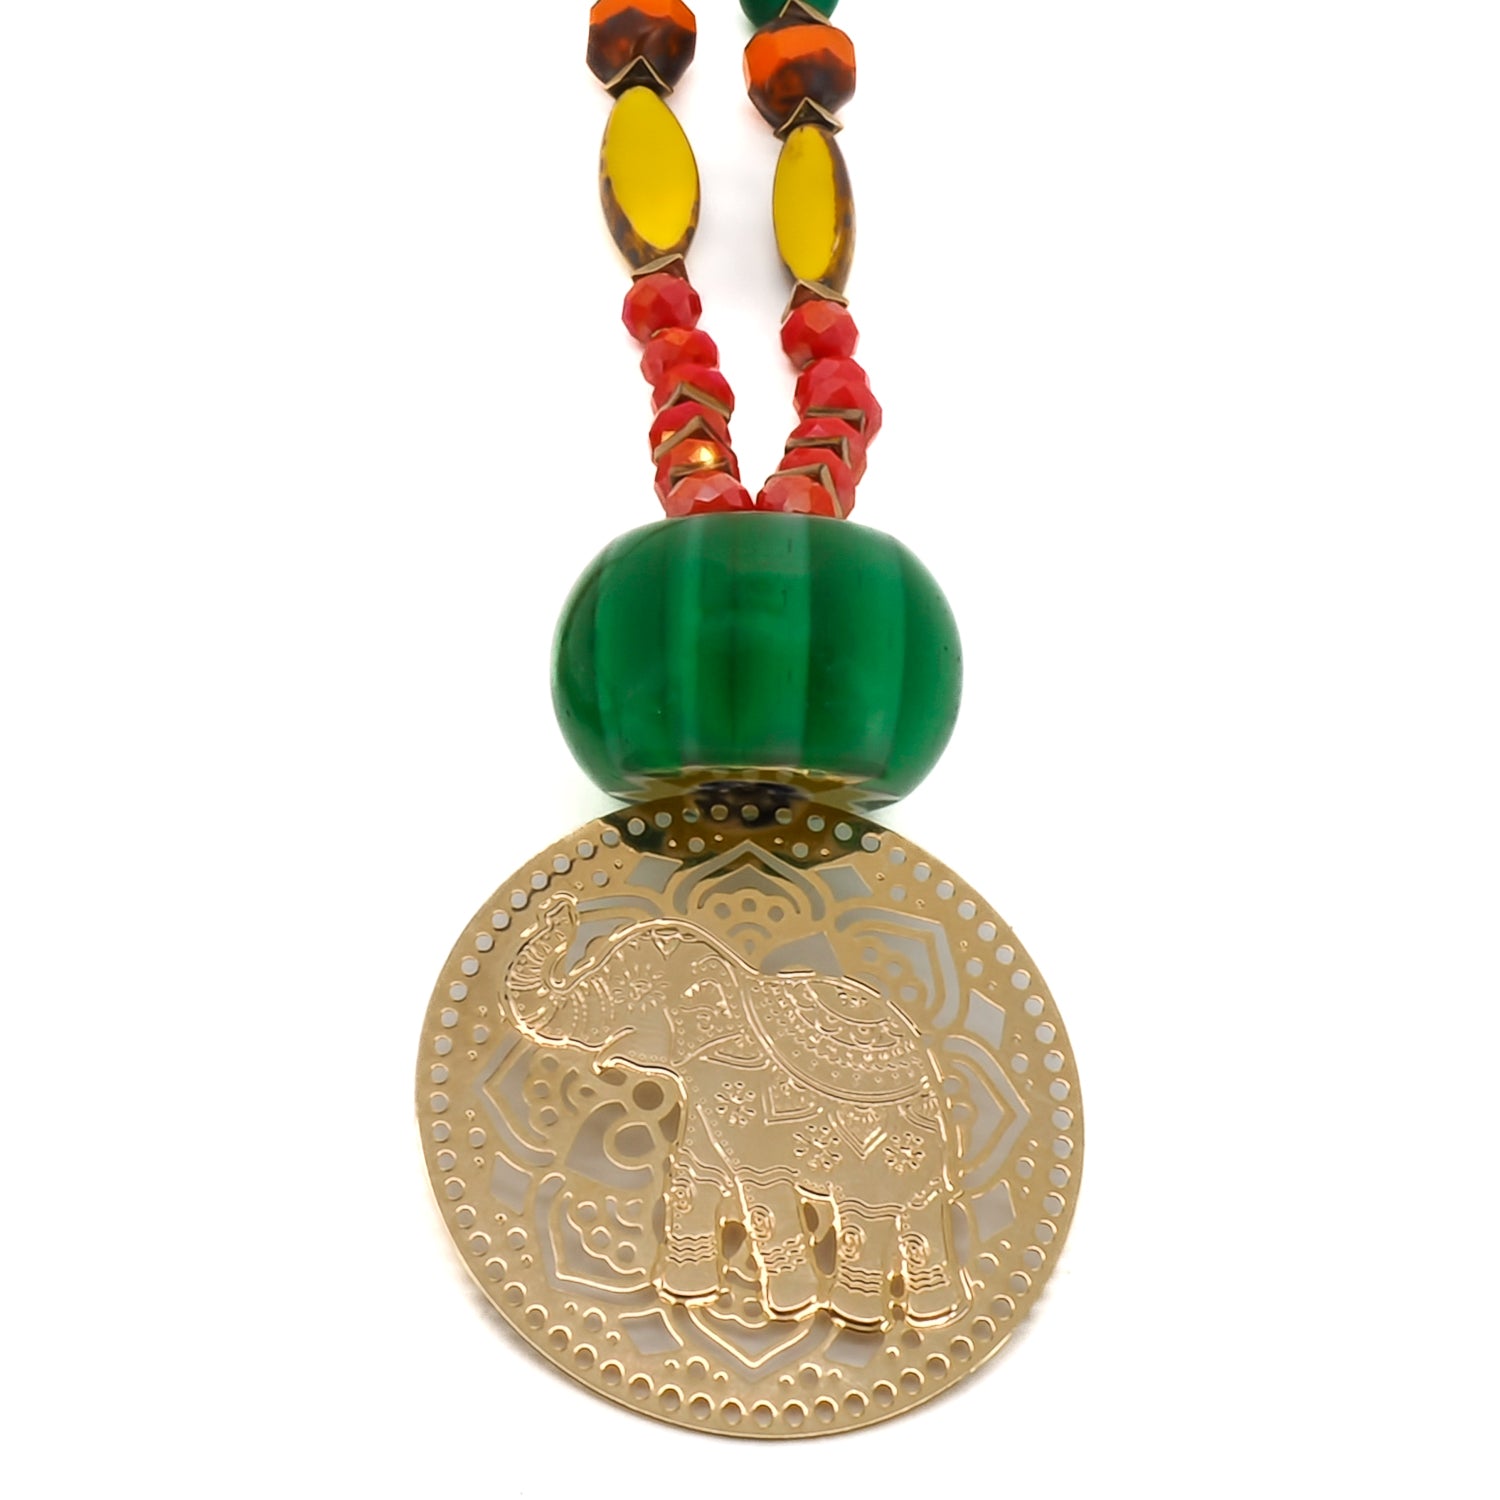 Experience the vibrancy of the Mystic Bohemian Elephant Necklace, as the crystal, jade, and African beads come together to create a necklace that radiates positive energy and bohemian style.